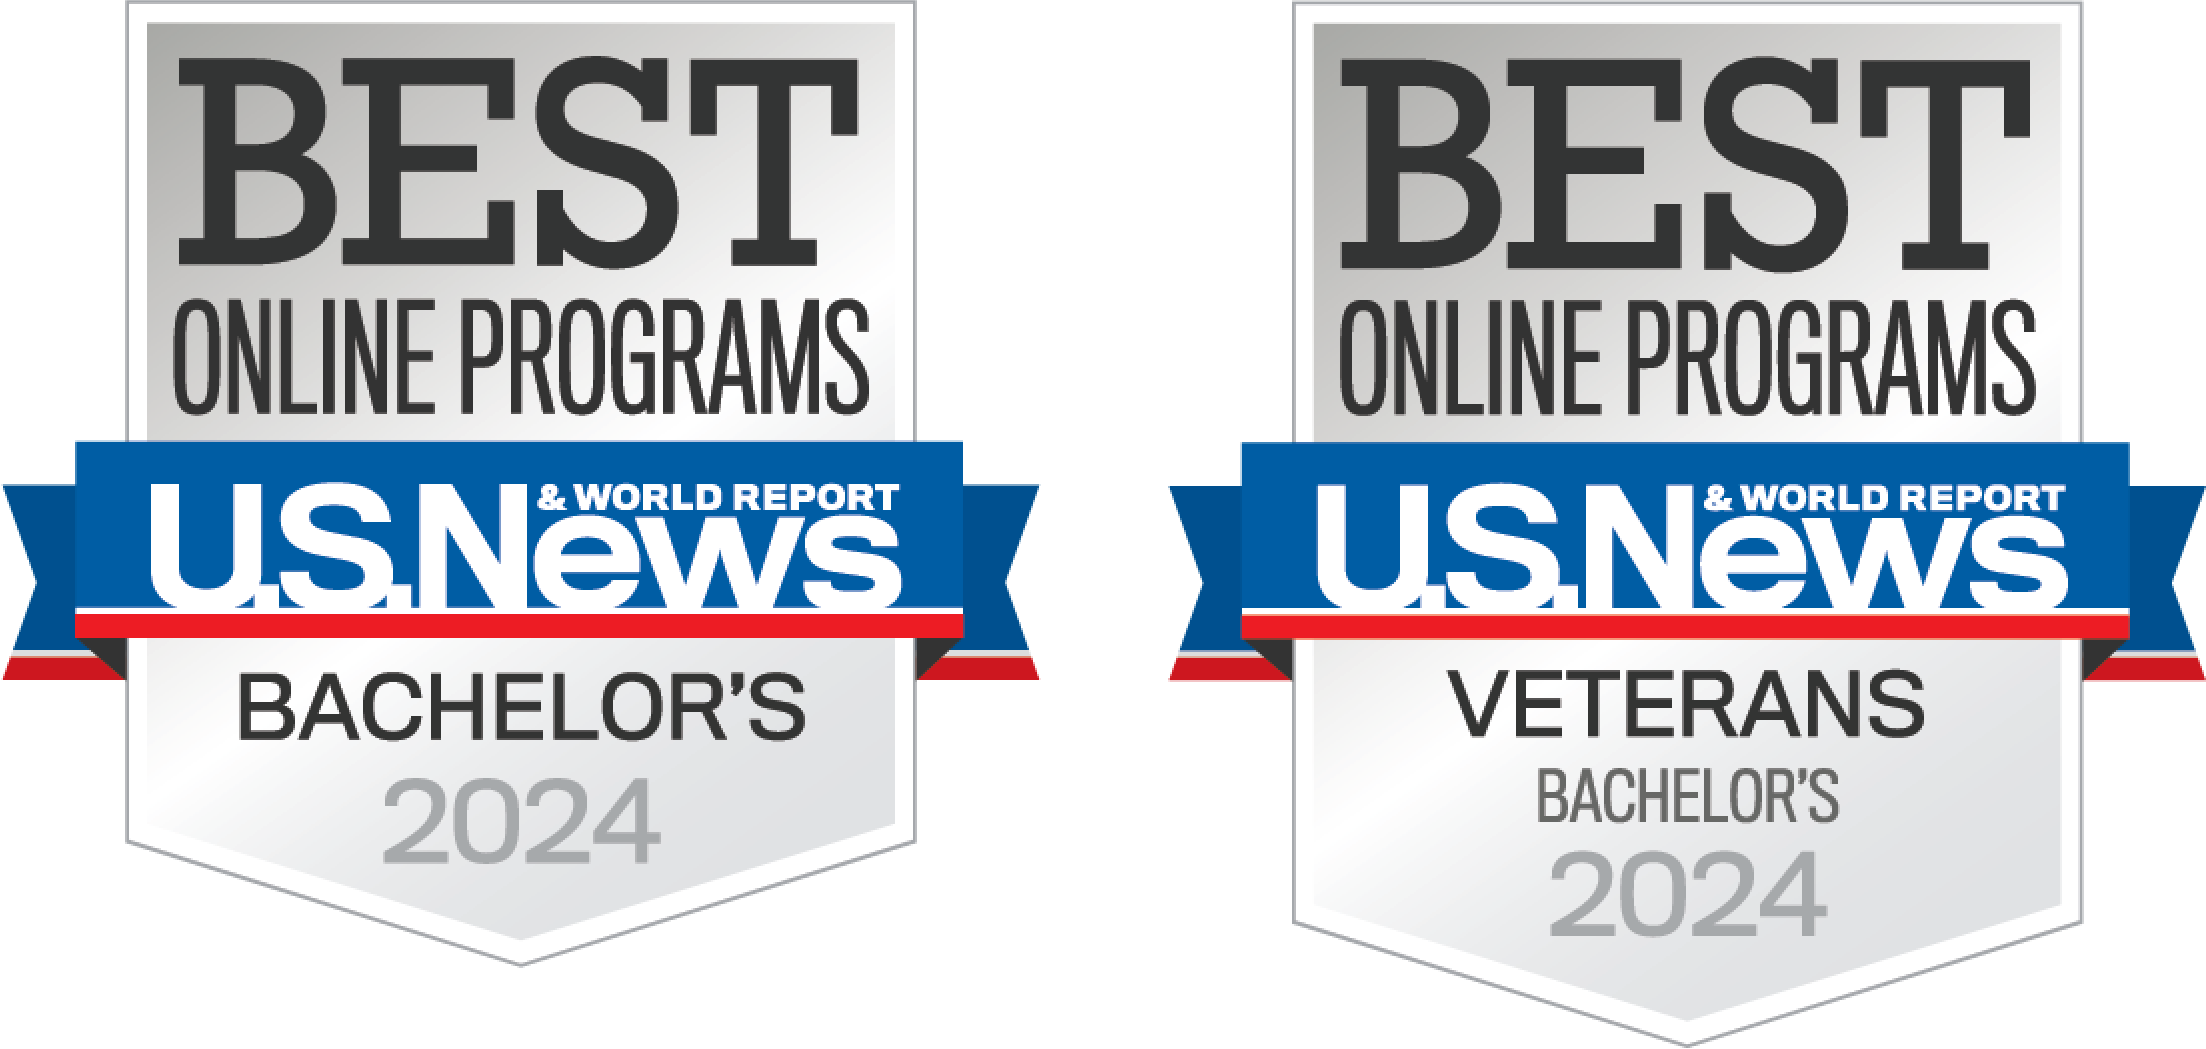 Siena Heights Online Program Nationally Ranked by the U.S. News & World Report for the Eleventh Consecutive Year